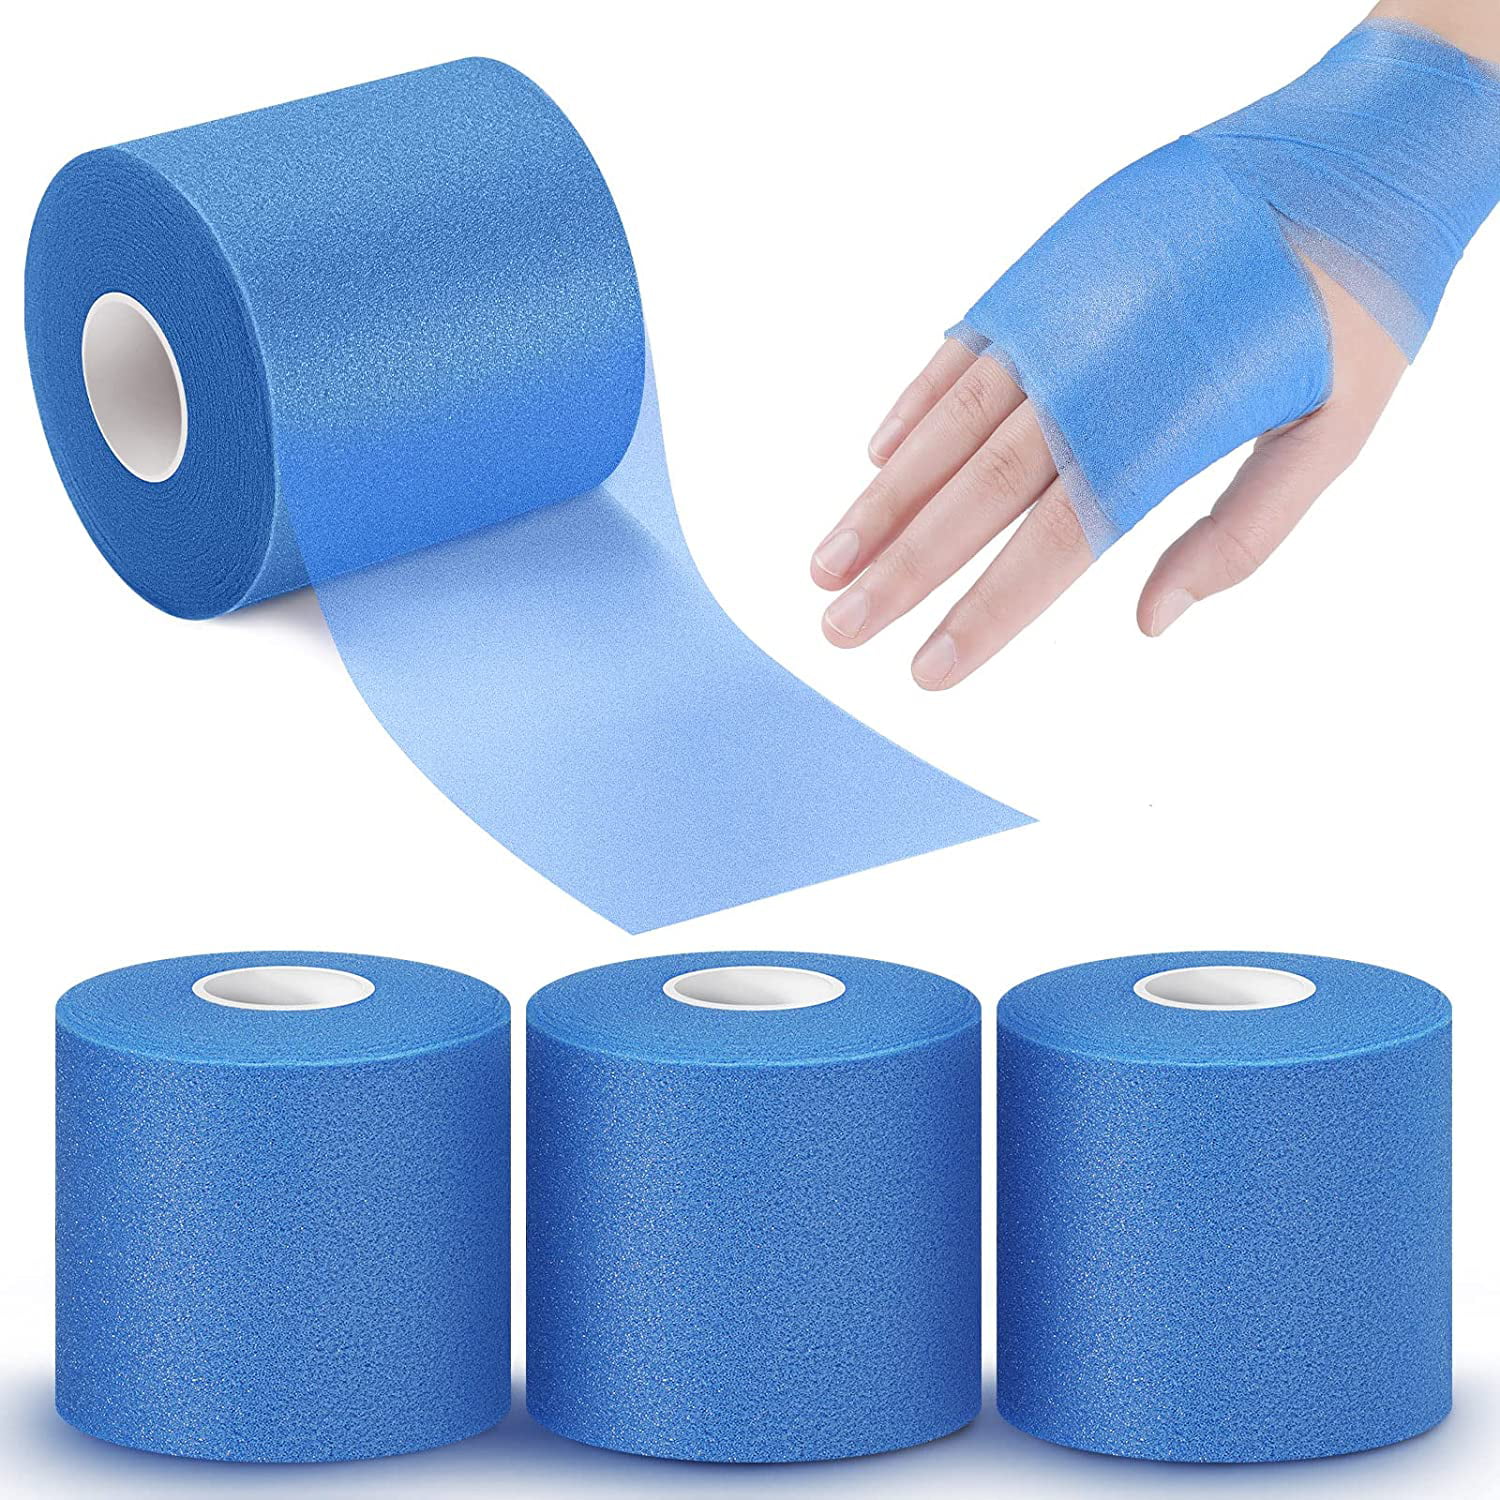 Mueller M-Wrap Foam Underwrap Case/48 Helps protect skin from tape chafing 